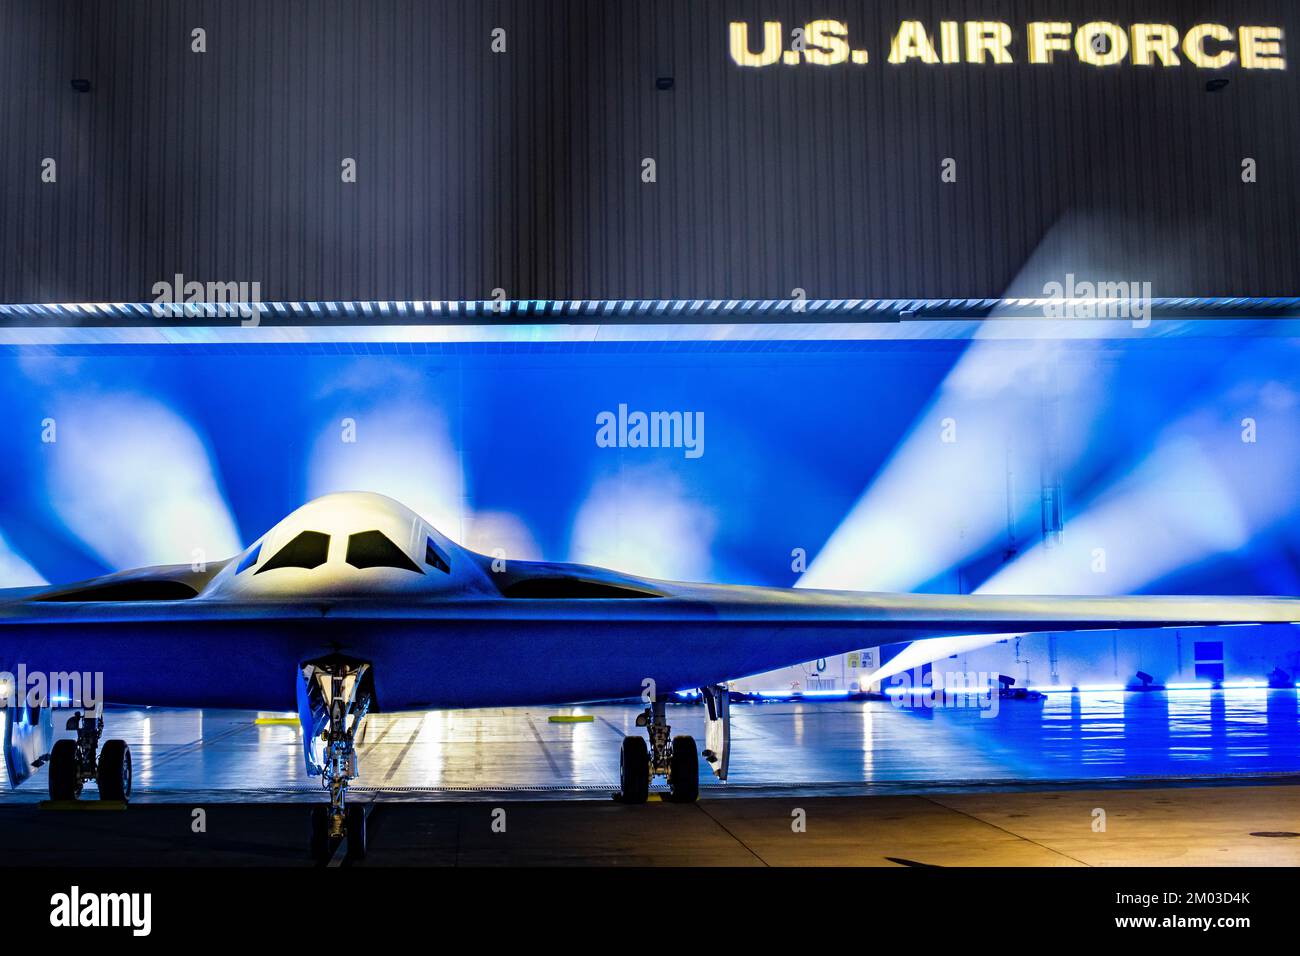 A B-21 Raider is unveiled at Northrop Grumman’s manufacturing facility on Air Force Plant 42 in Palmdale, California, Dec. 2, 2022. The B-21 will be a long-range, highly survivable, penetrating strike stealth bomber capable of delivering both conventional and nuclear munitions. (U.S. Air Force photo by Airman 1st Class Joshua M. Carroll) Stock Photo